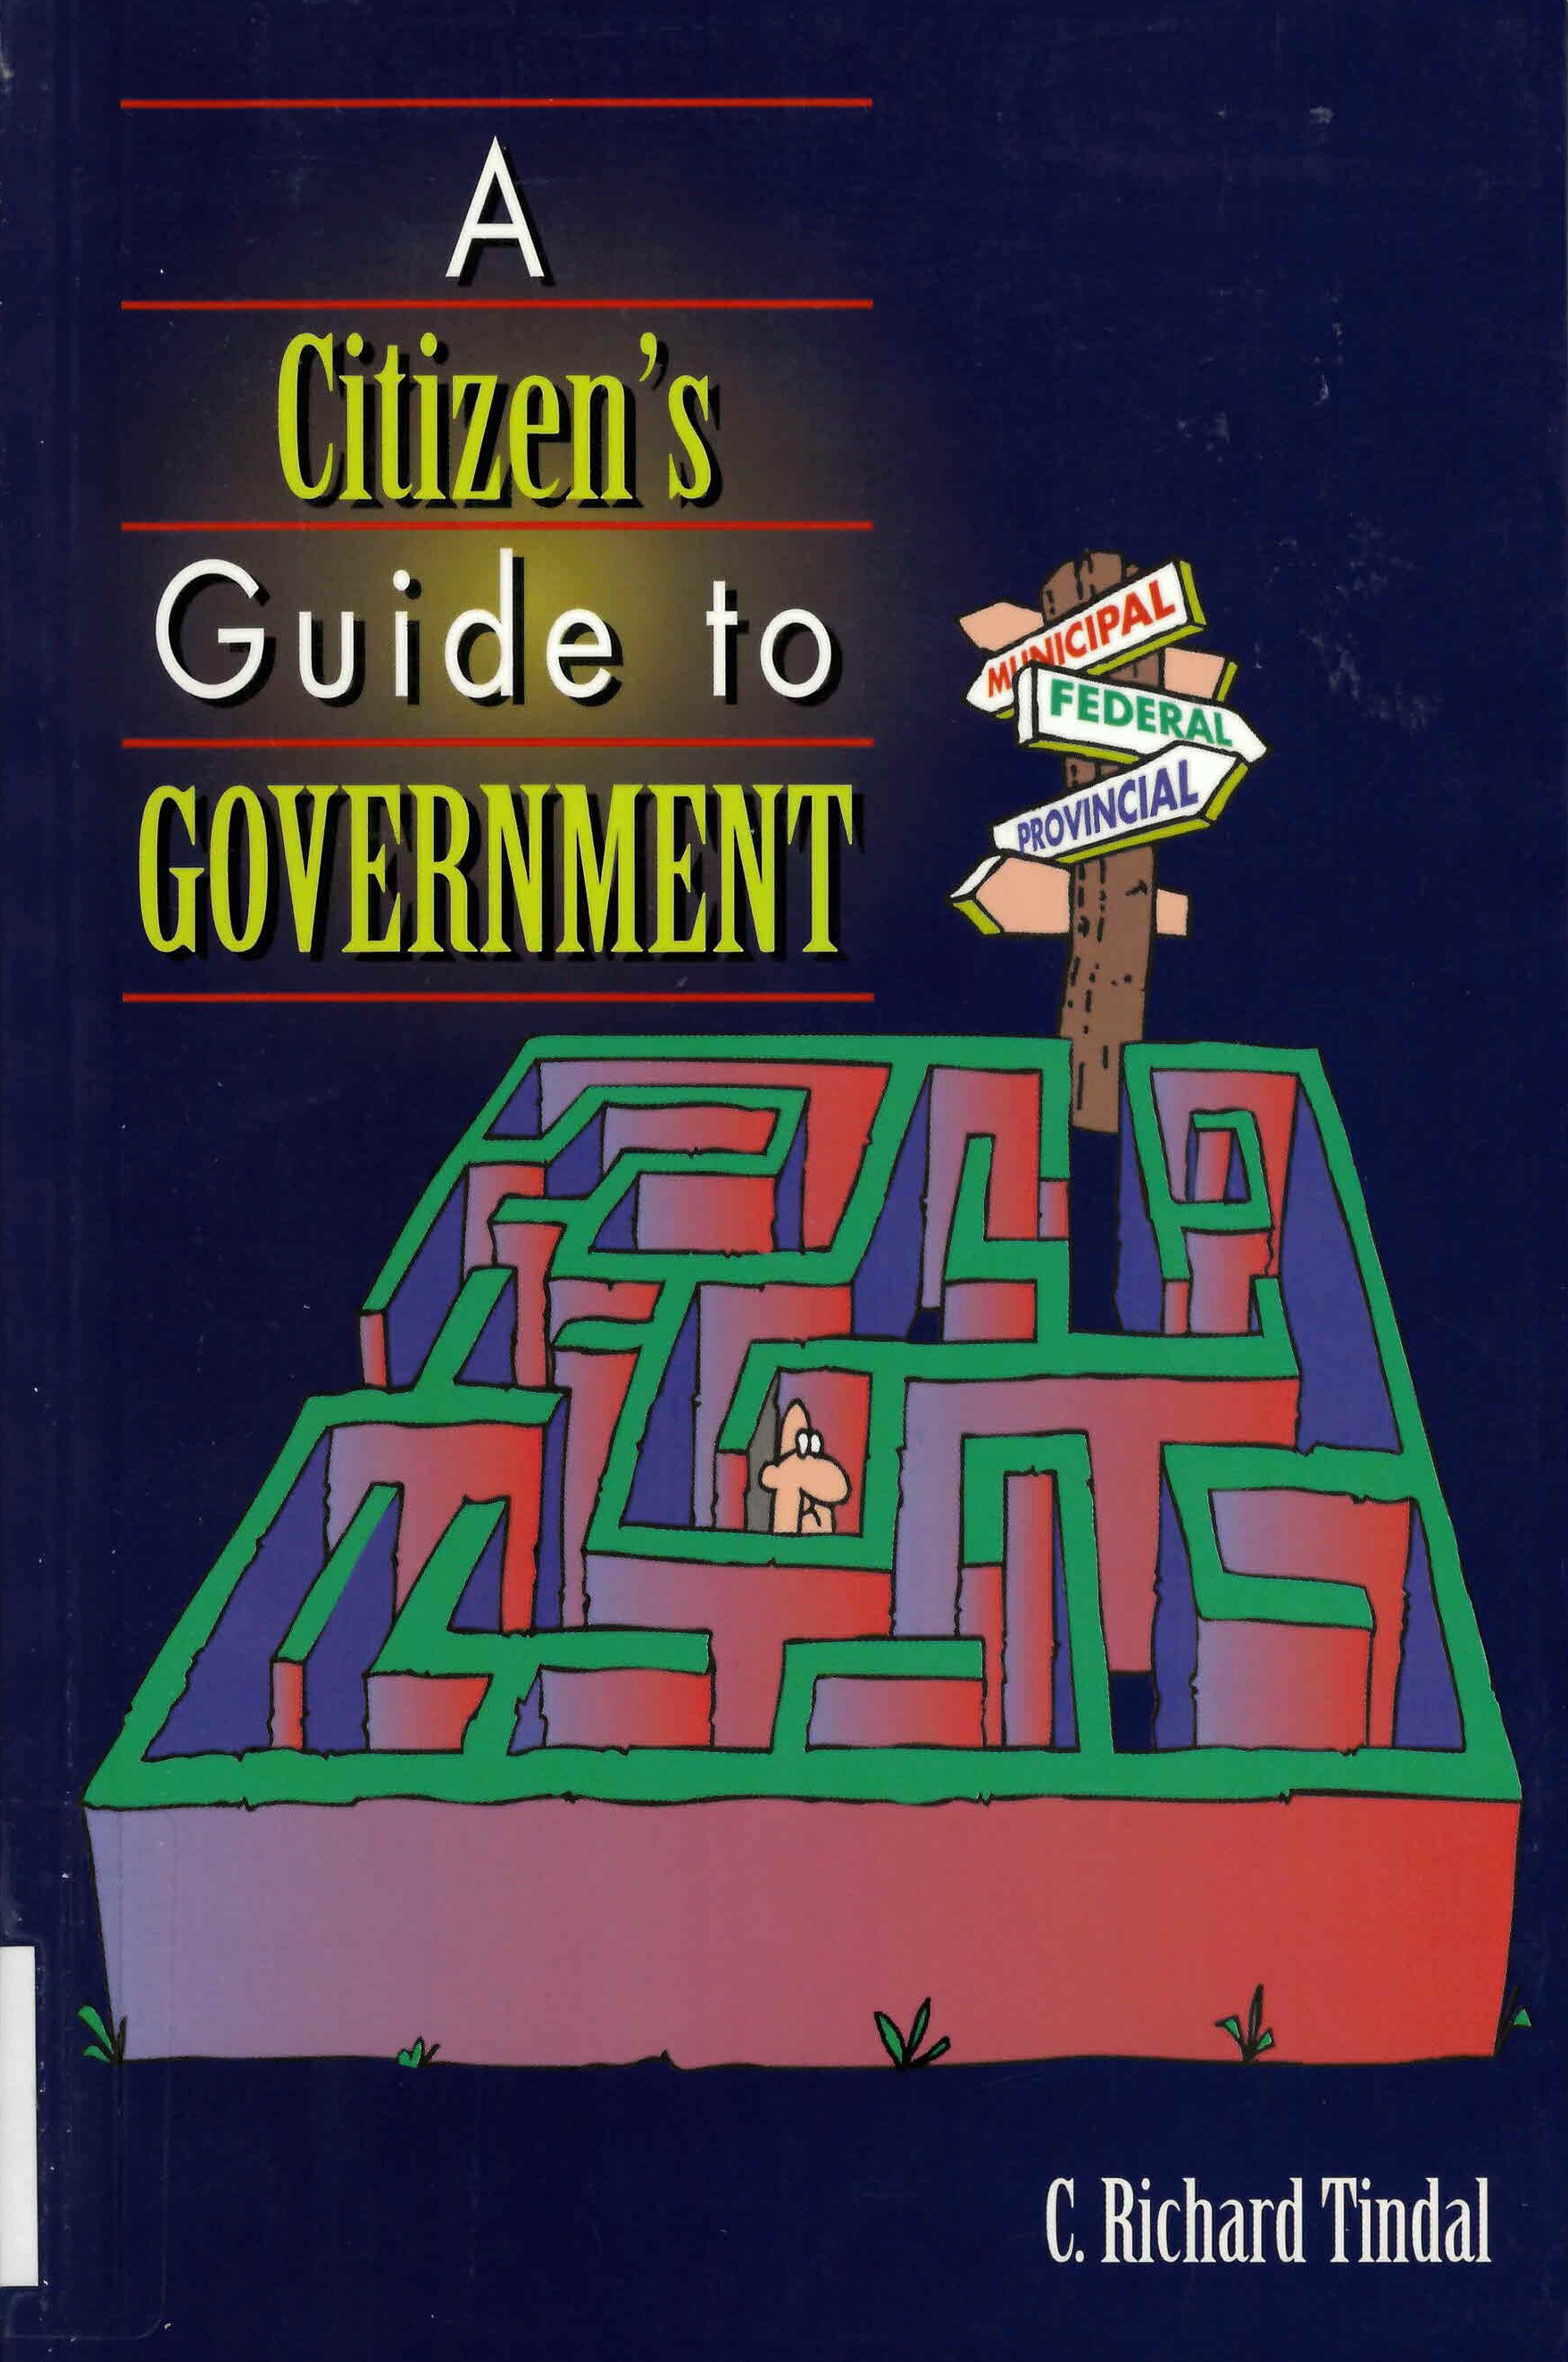 A citizen's guide to government